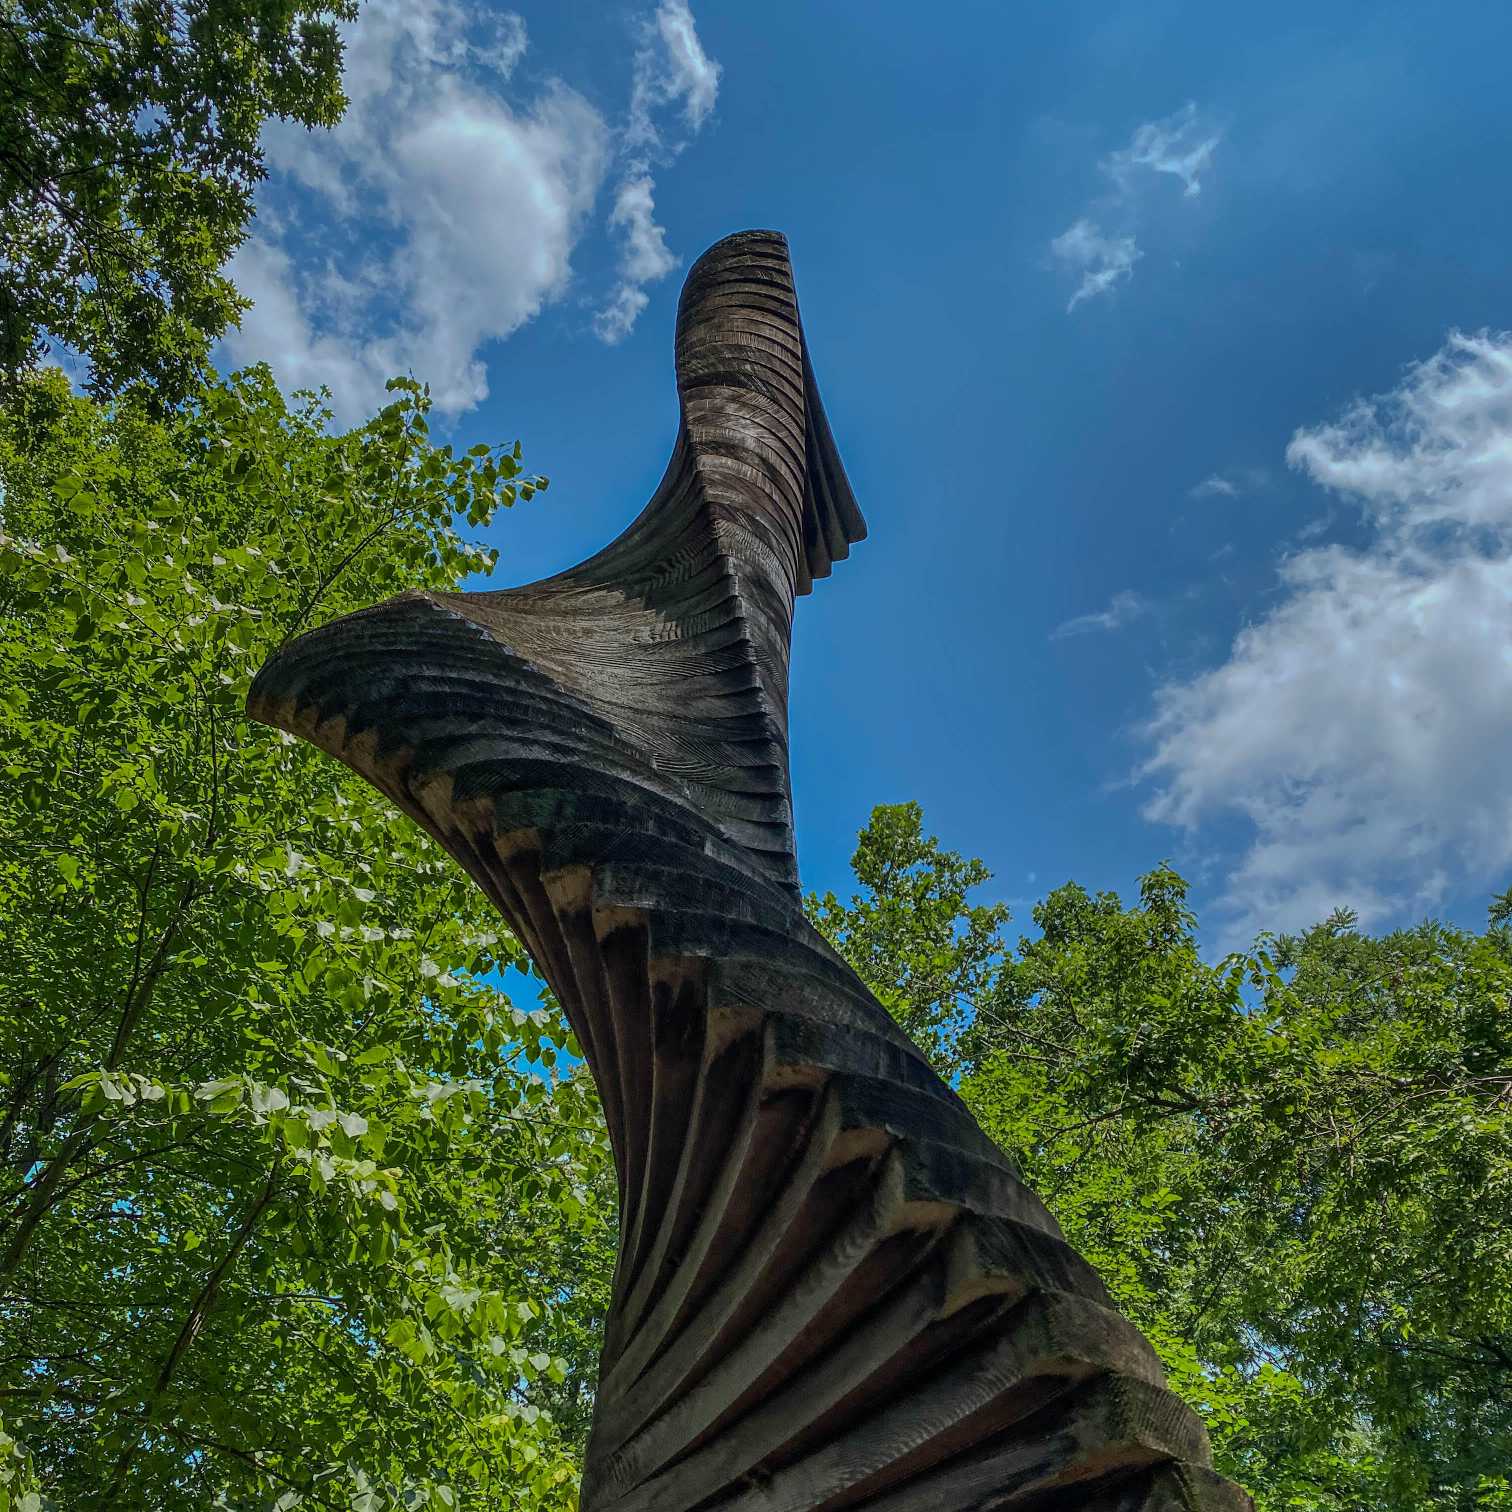 A view from below shows the spirals of the wooden Easton Ellipse sculpture along with blue sky, white clouds and green trees on the Karl Stirner Arts Trail in Easton, Pennsylvania.